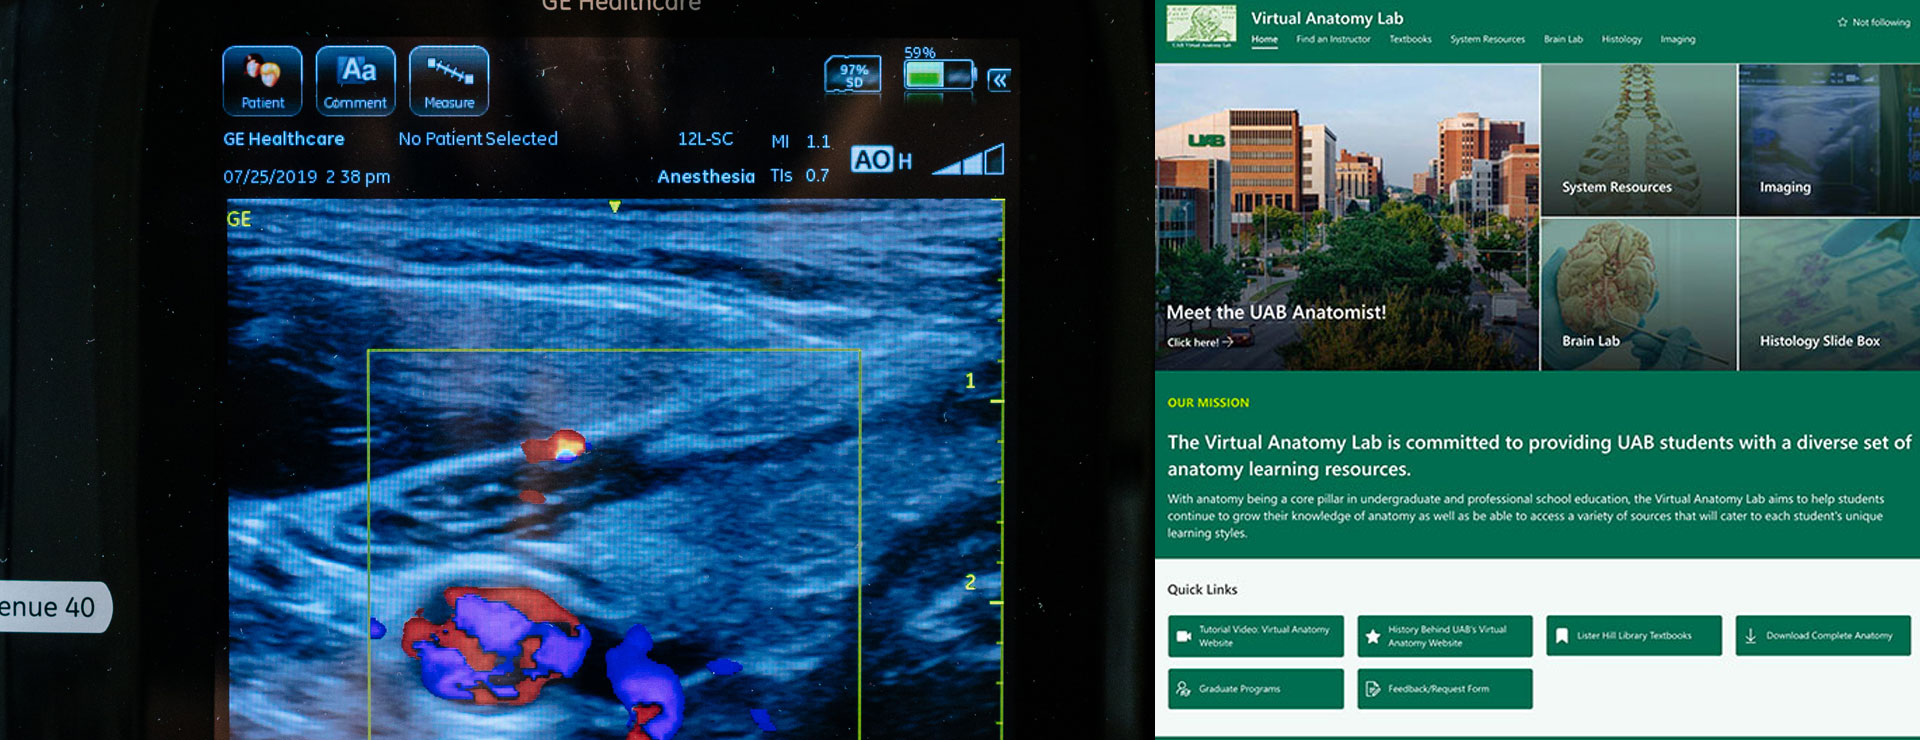 New site gives UAB students an edge in anatomy studies